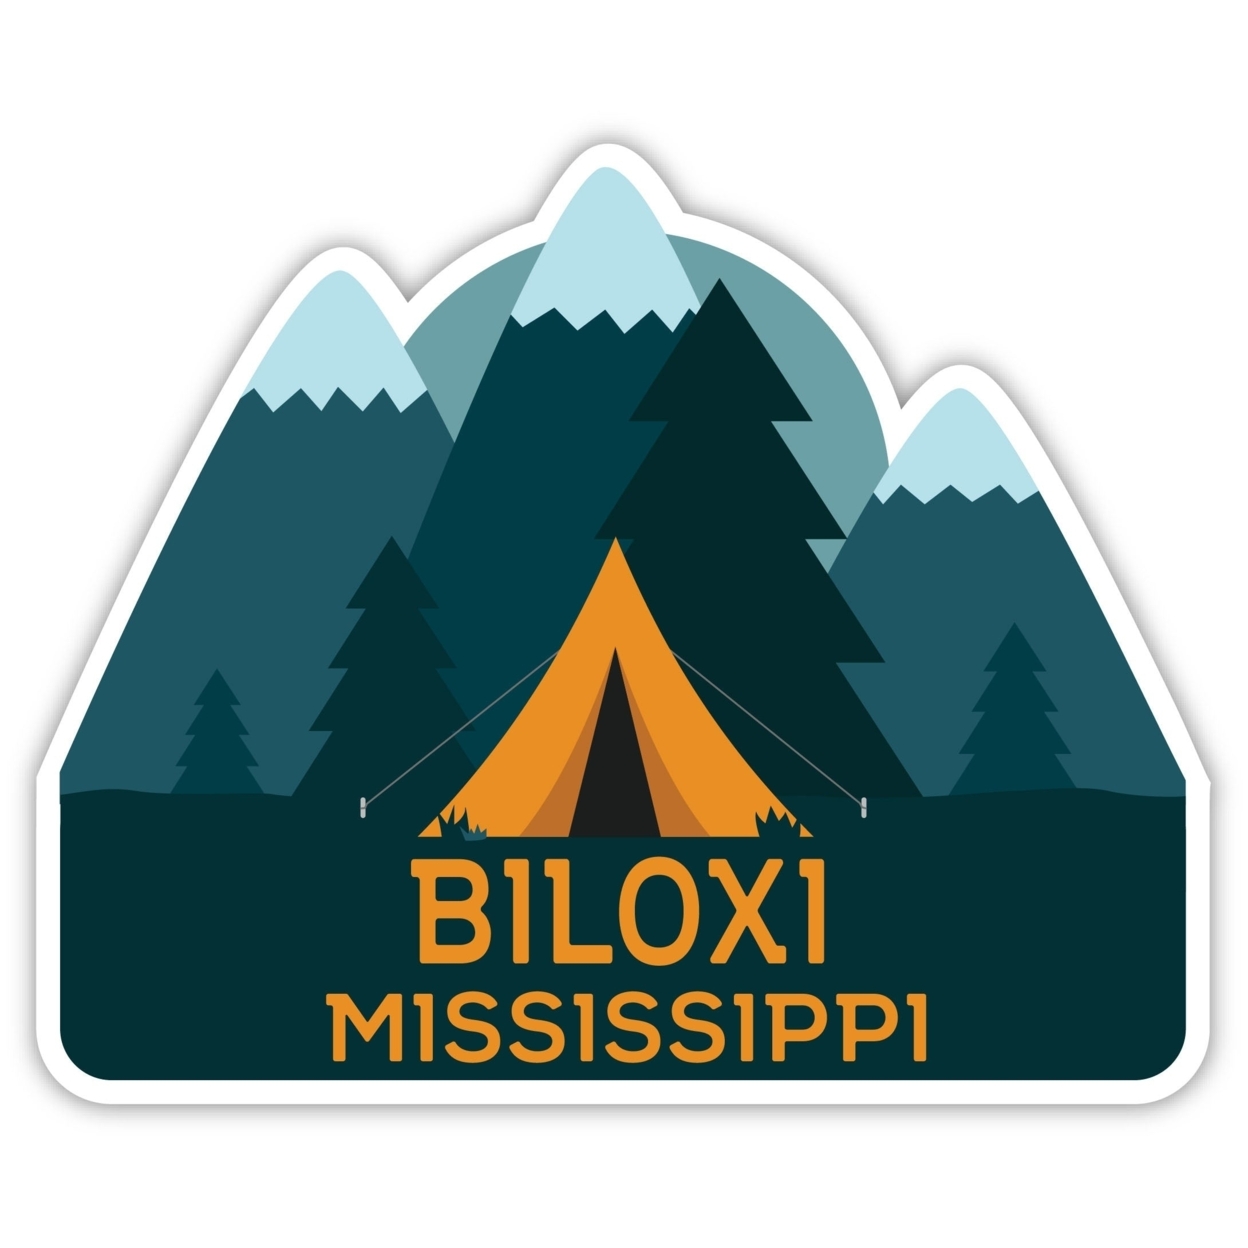 Biloxi Mississippi Souvenir Decorative Stickers (Choose Theme And Size) - 4-Pack, 2-Inch, Tent